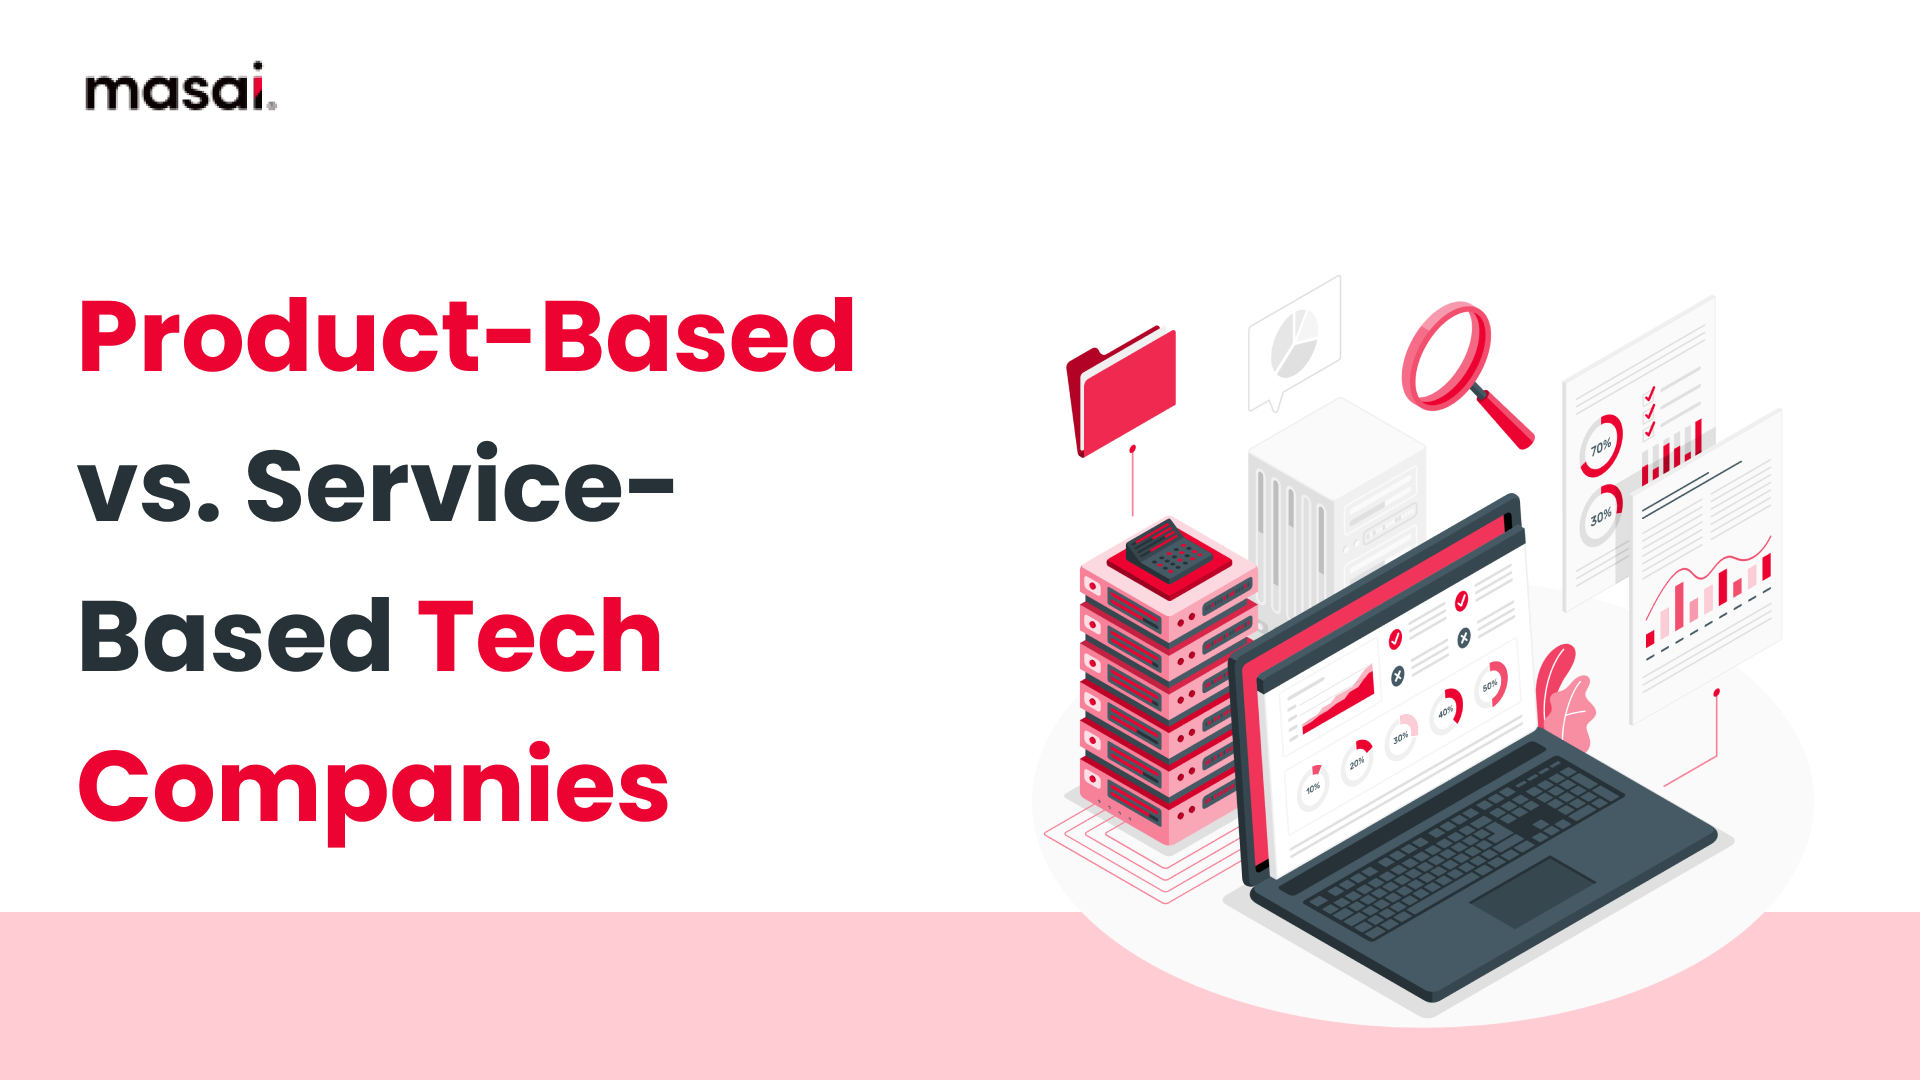 Product-based vs service-based companies